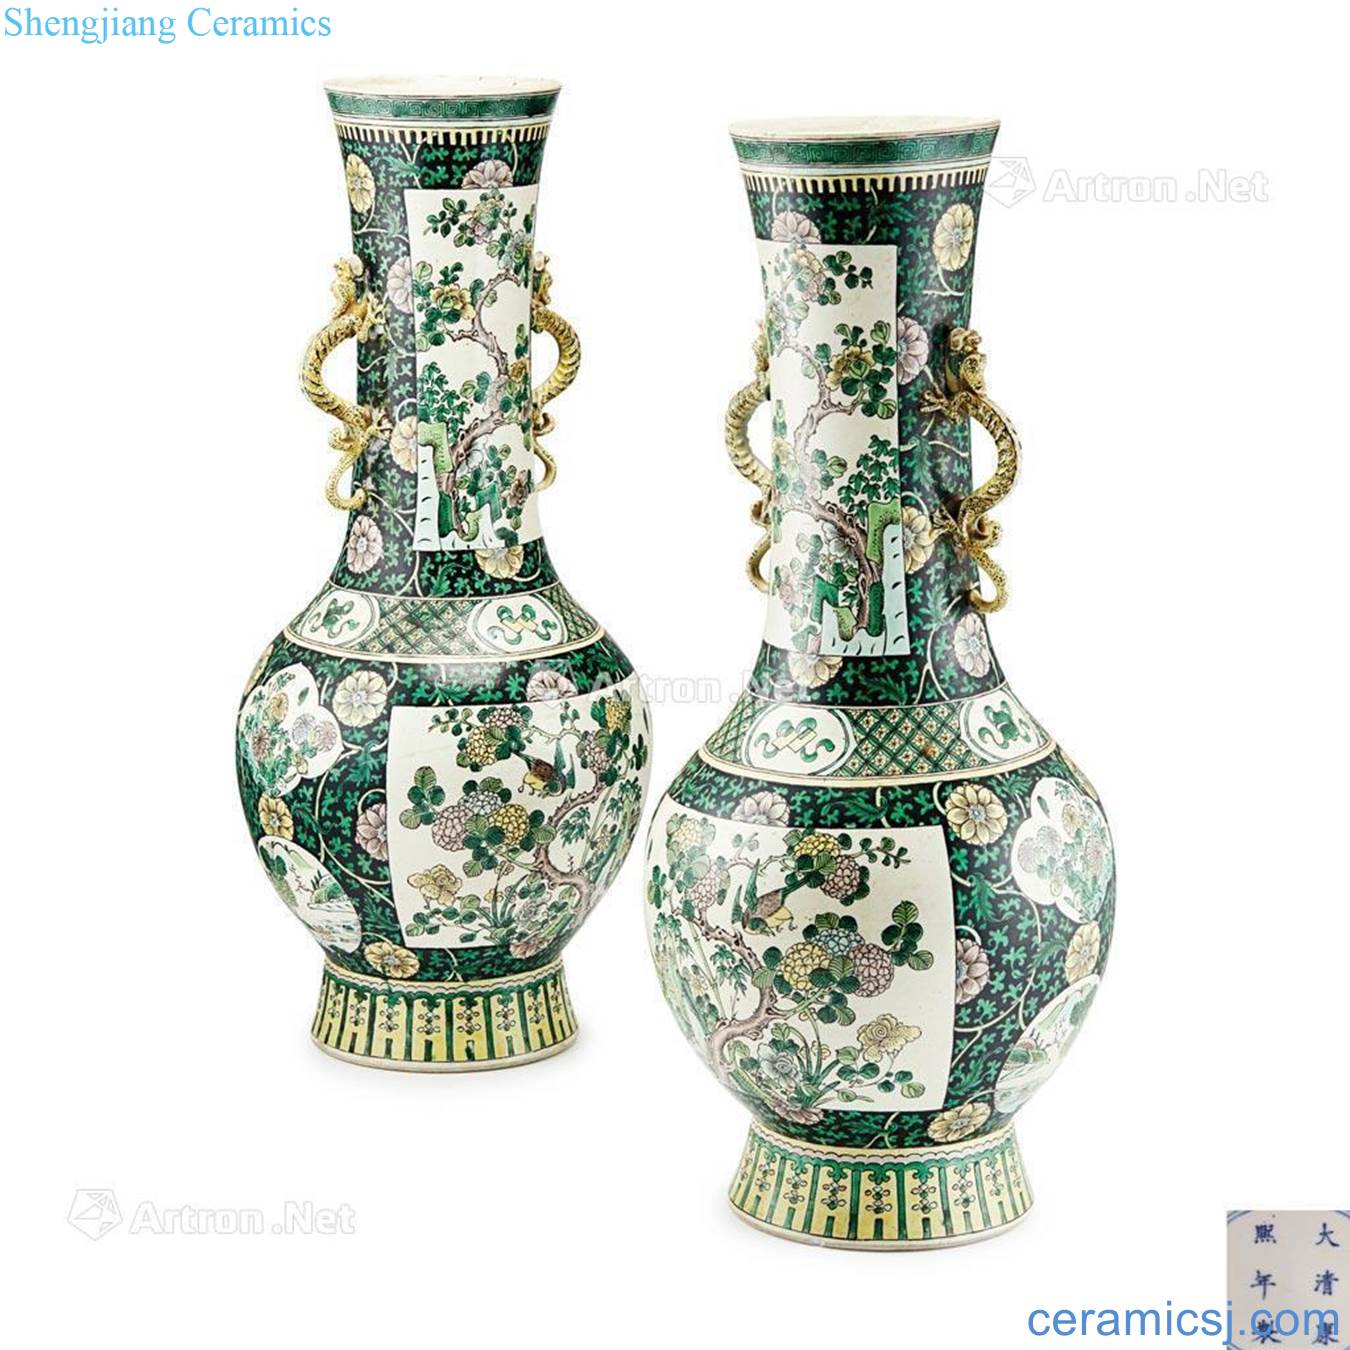 KANGXI MARK BUT 19 th CENTURY PAIR OF EXCEPTIONALLY LARGE FAMILLE VERTE VASES